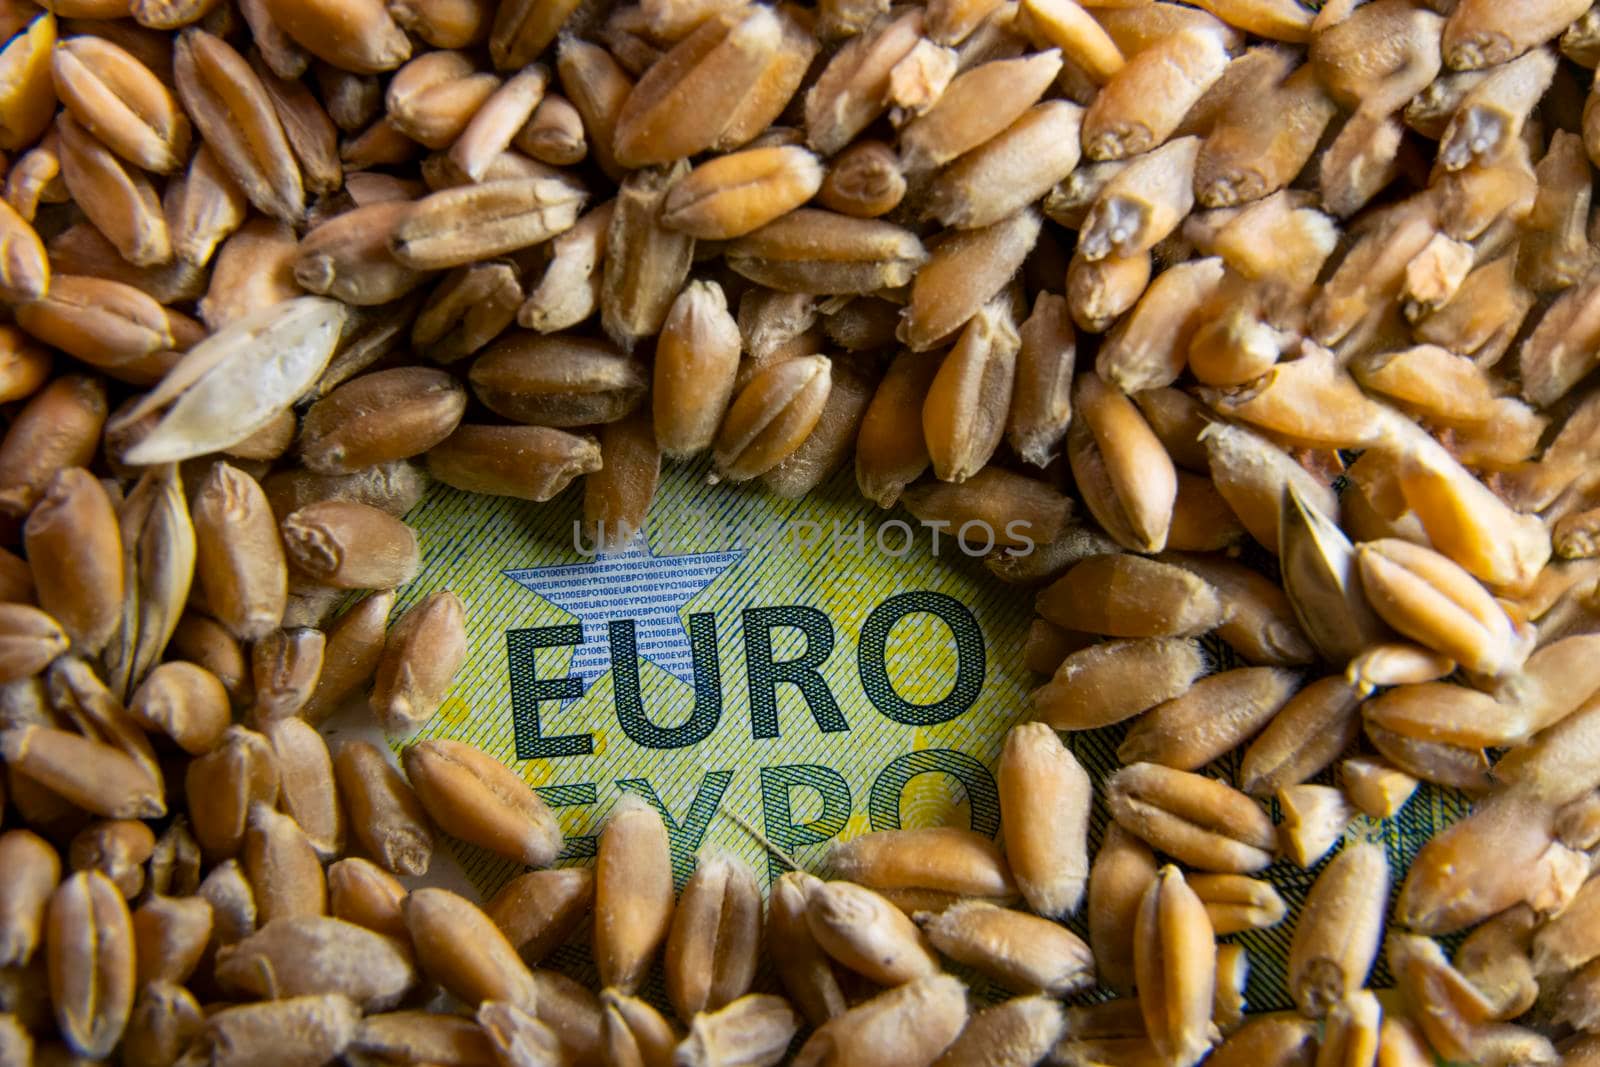 euro inscription on the banknote which is visible from under the wheat grain by zokov